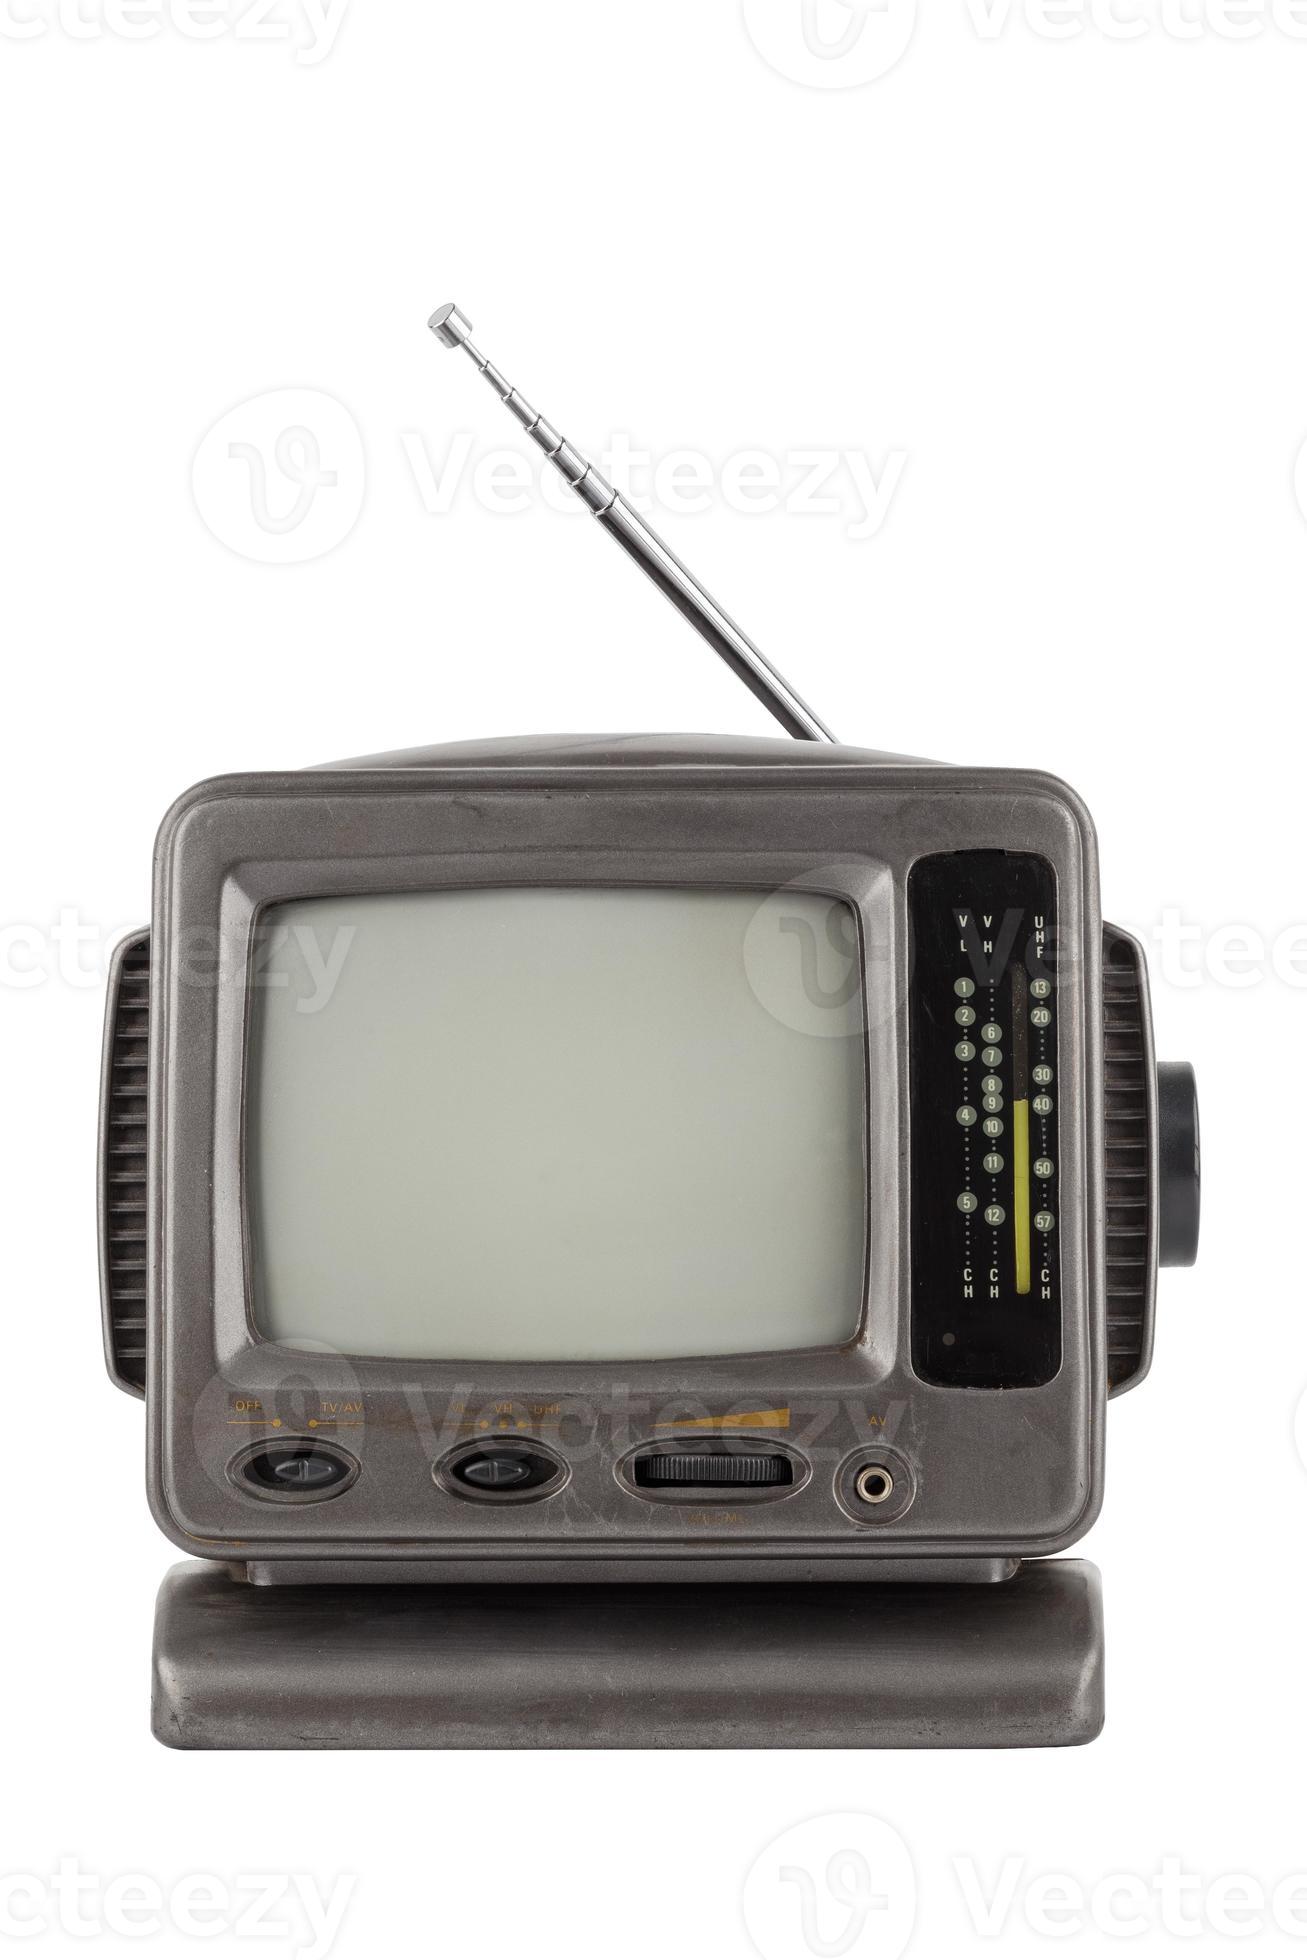 https://static.vecteezy.com/system/resources/previews/012/627/264/large_2x/old-5-5-inch-protable-analog-crt-tv-unit-isolated-on-white-front-view-photo.jpg